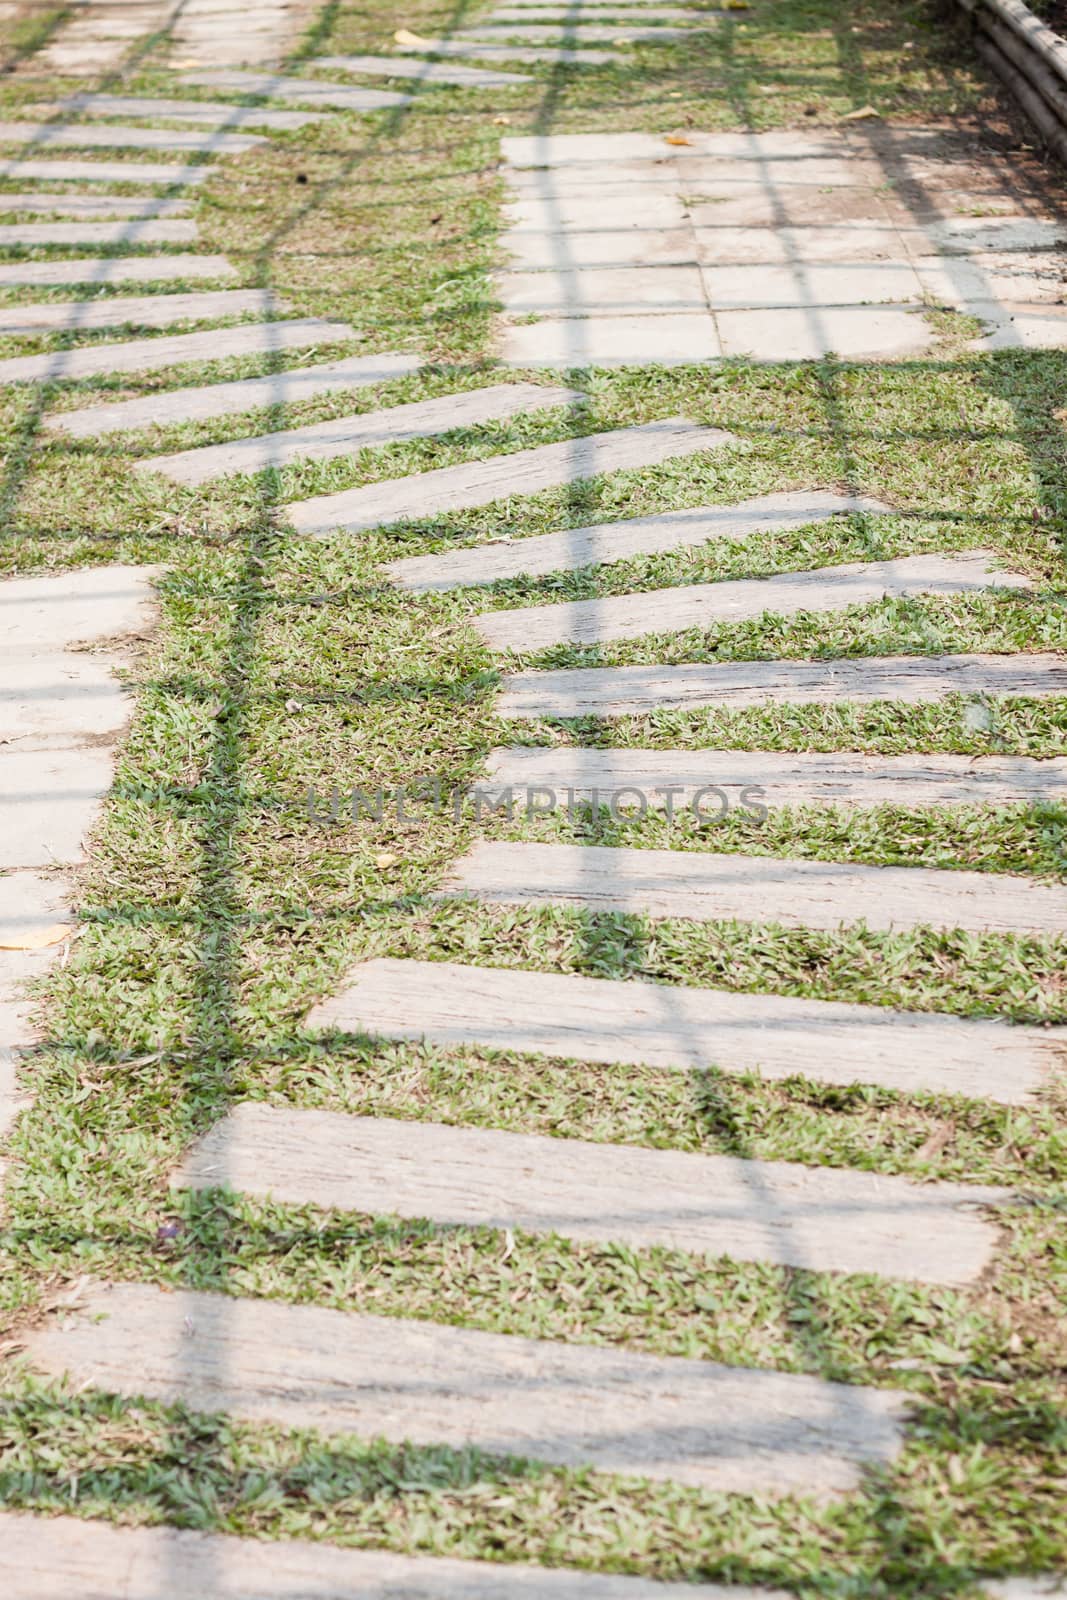 Garden stone path with grass by punsayaporn